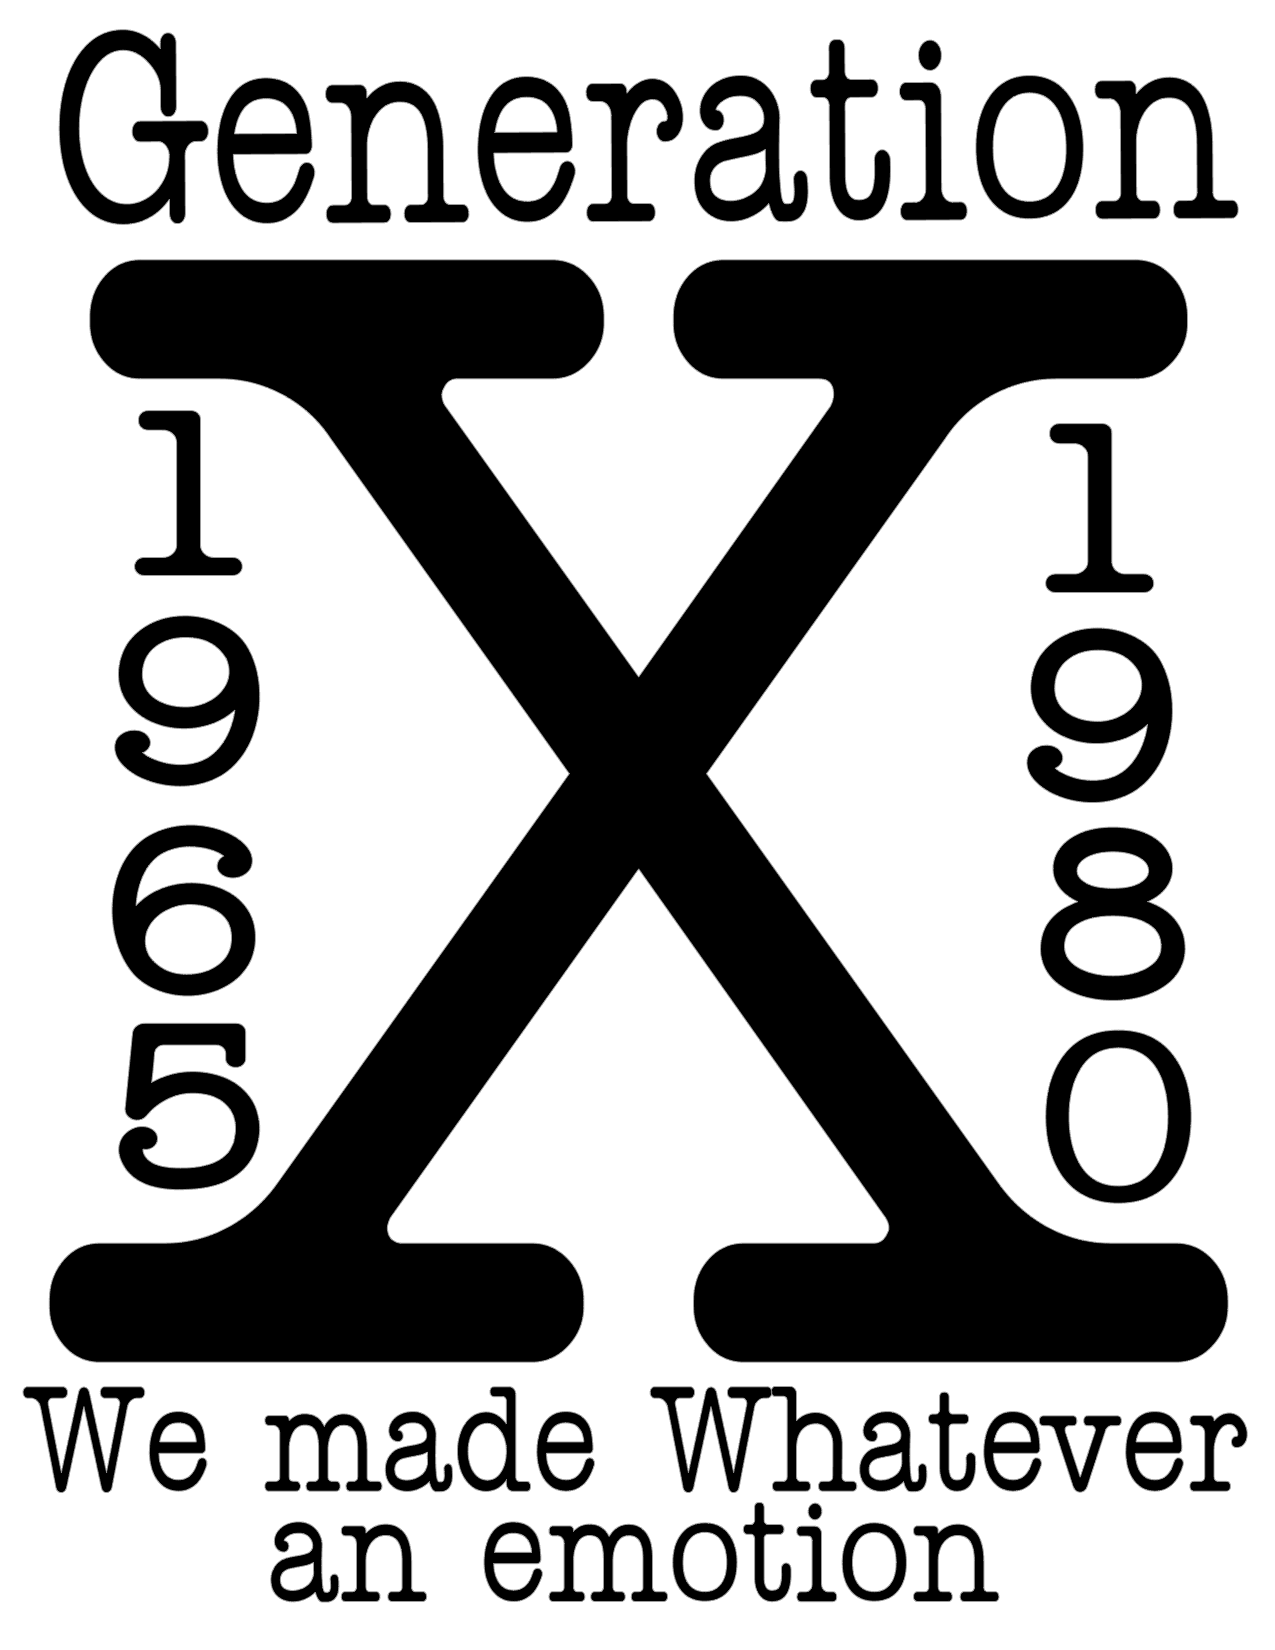 #419 Generation X 1960-1985 We made an whatever an emotion